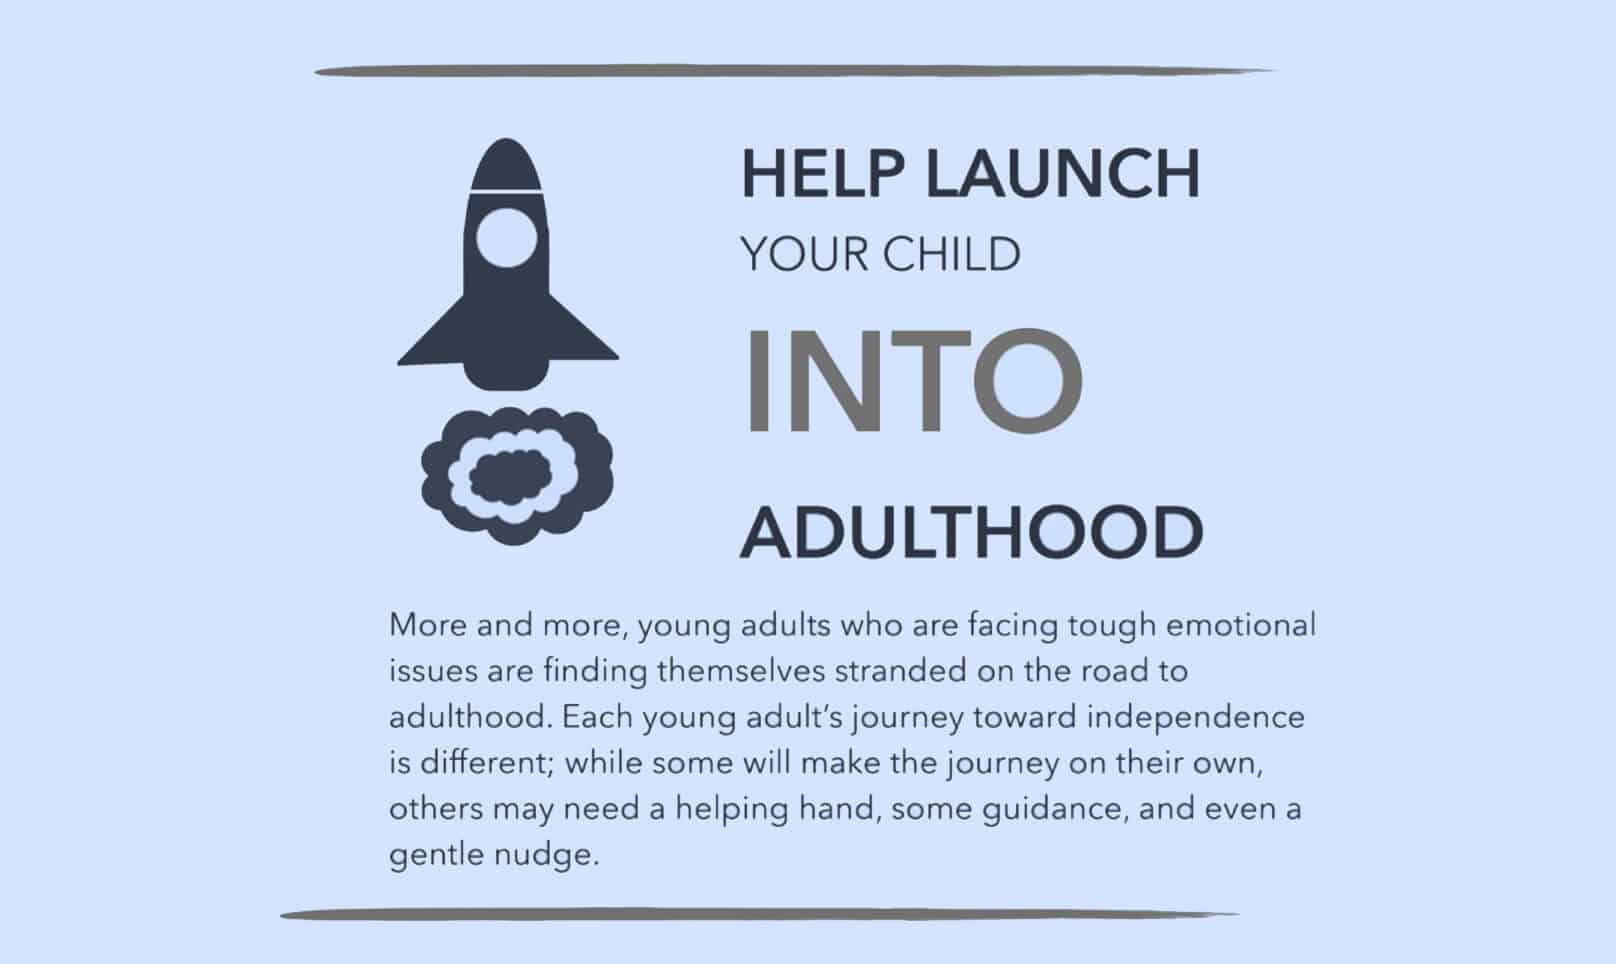 Help launch your child into adulthood - Pure Life Adventure in Costa Rica